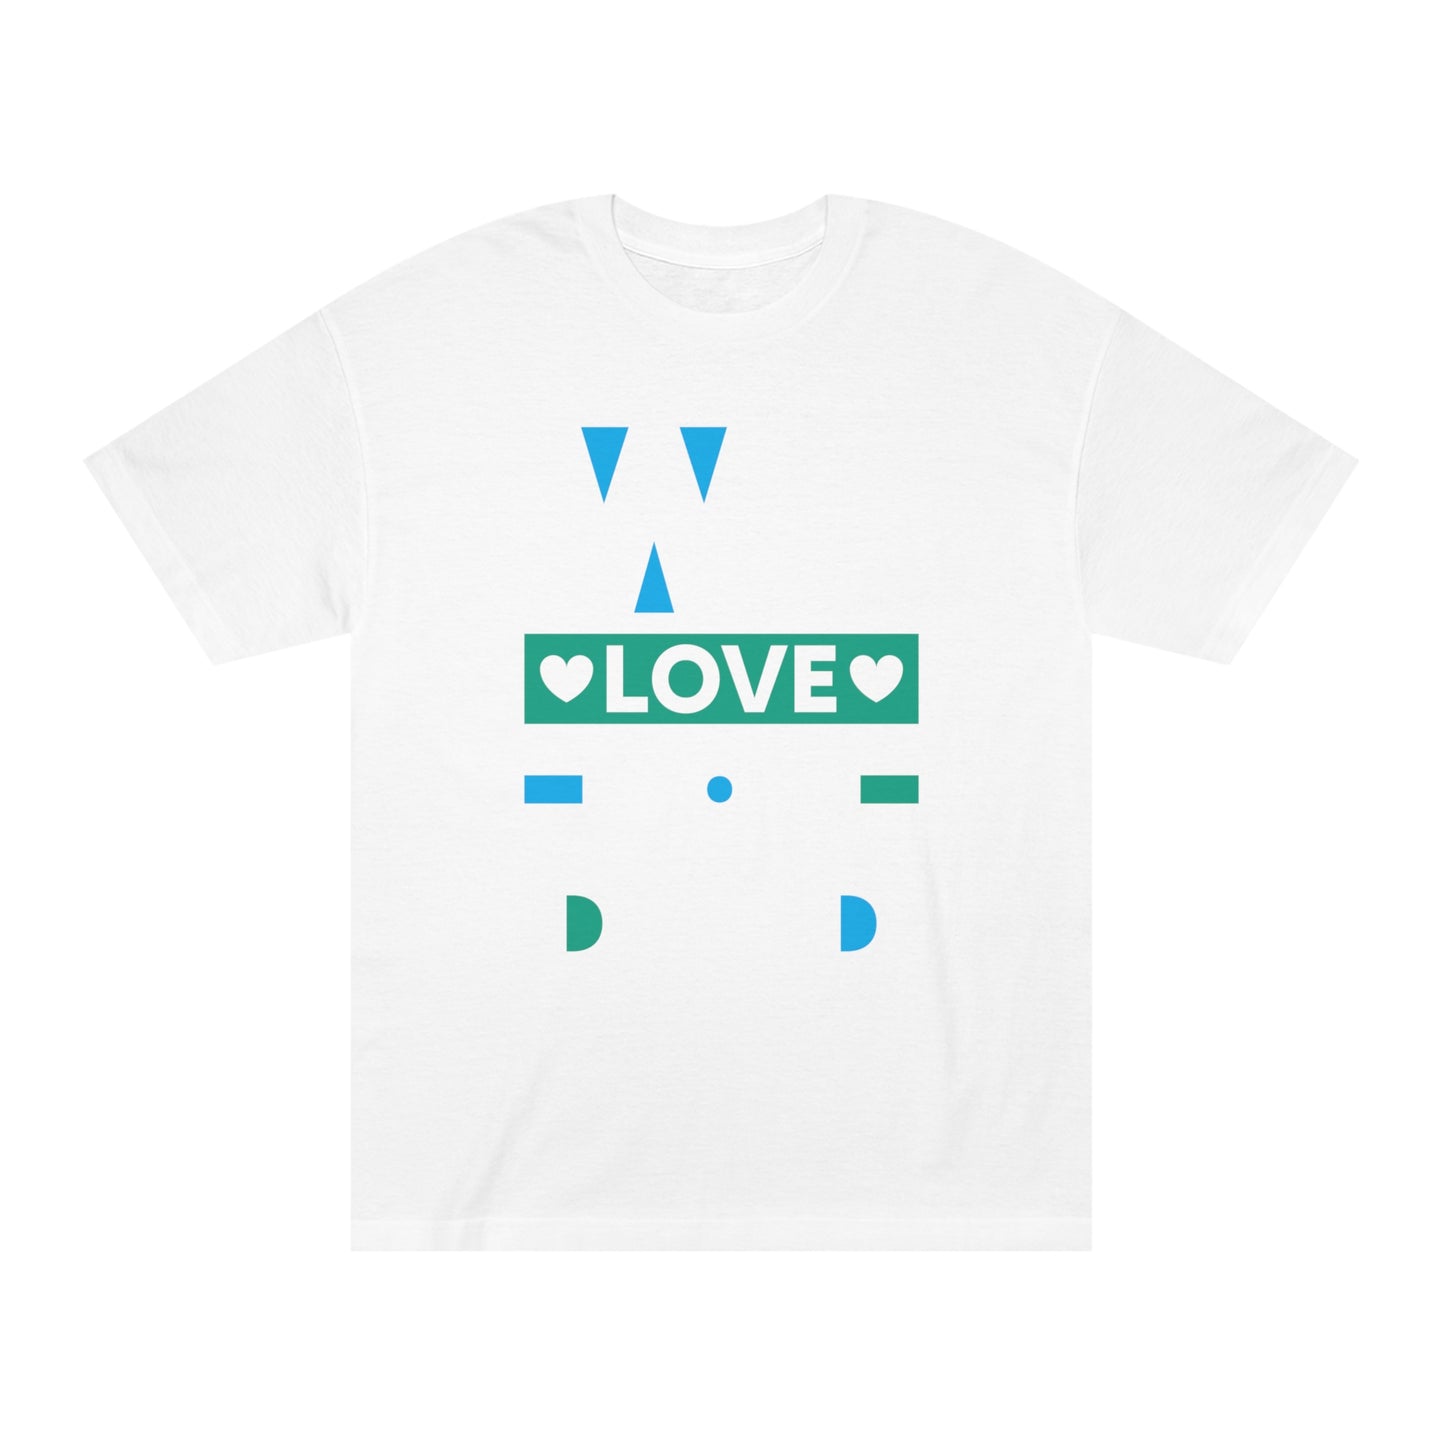 We love you dad Unisex Classic Tee